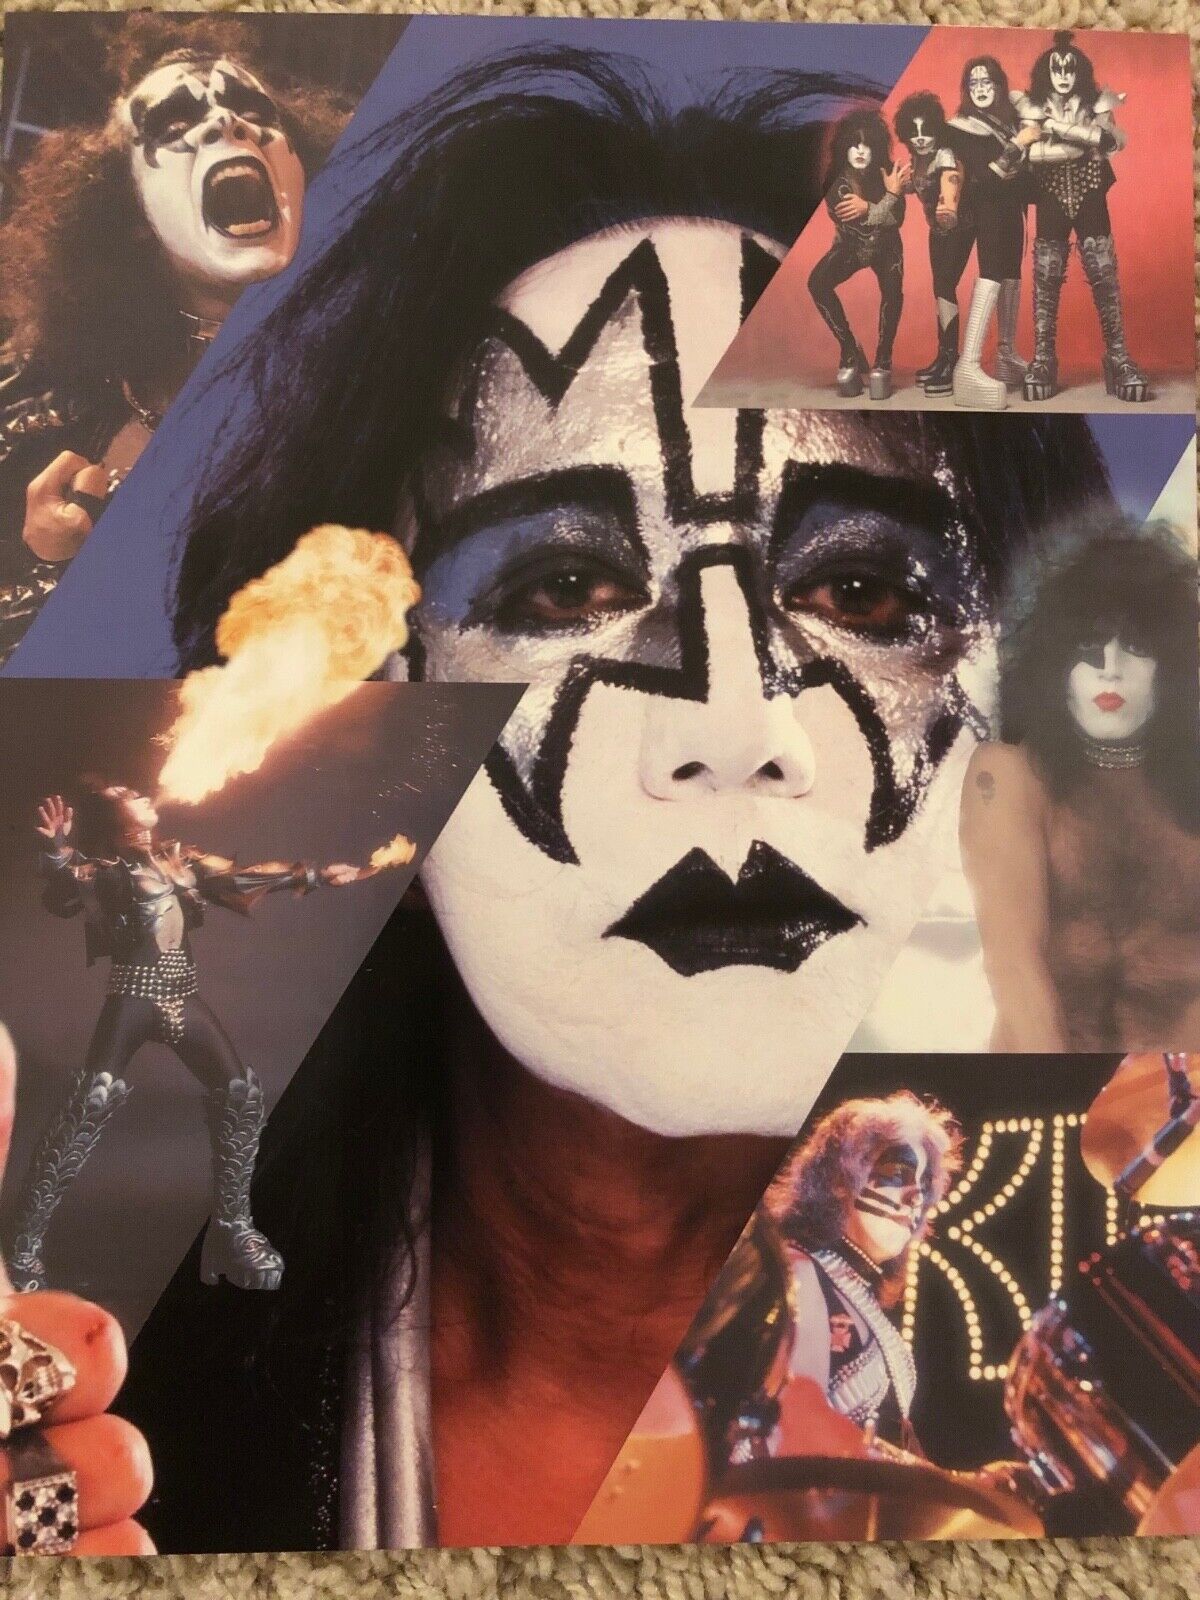 KISS individual photo signed by Gene Simmons and Paul Stanle (4 pictures) JSA Без бренда - фотография #5